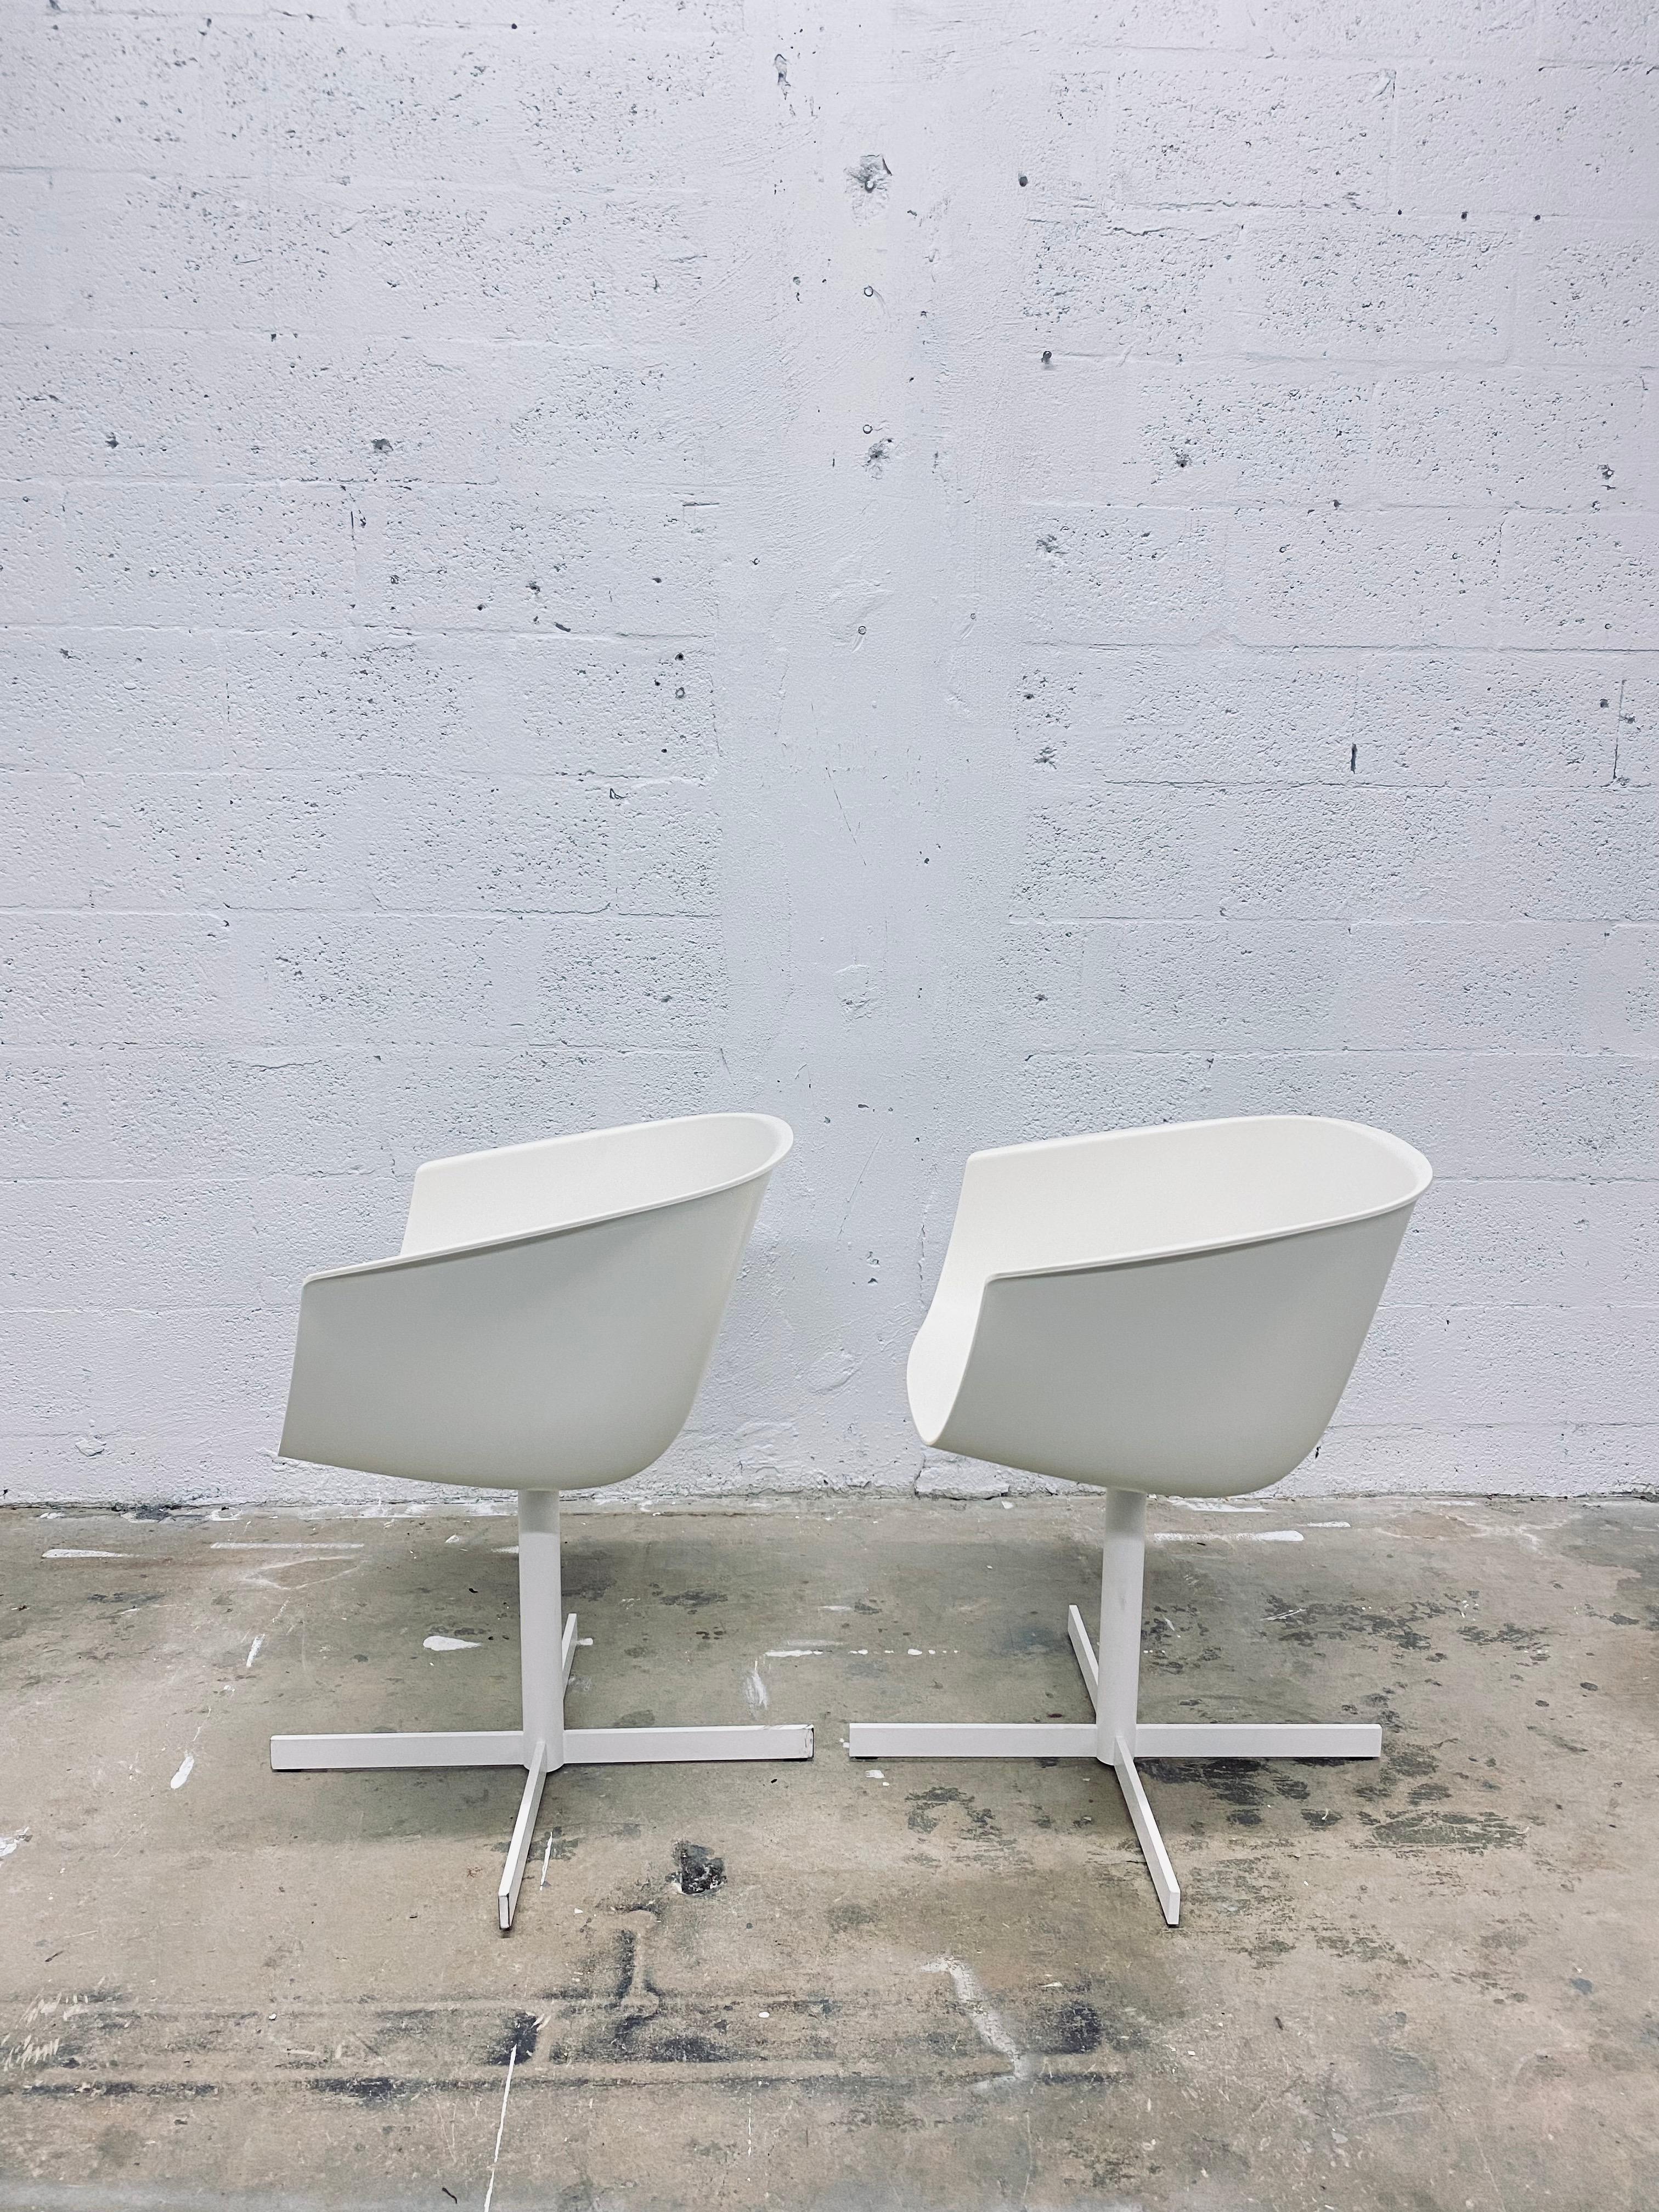 Carlo Colombo designed Strip dining or side chairs made of matte white moulded plastic seats and steel swivel frame for Poliform.